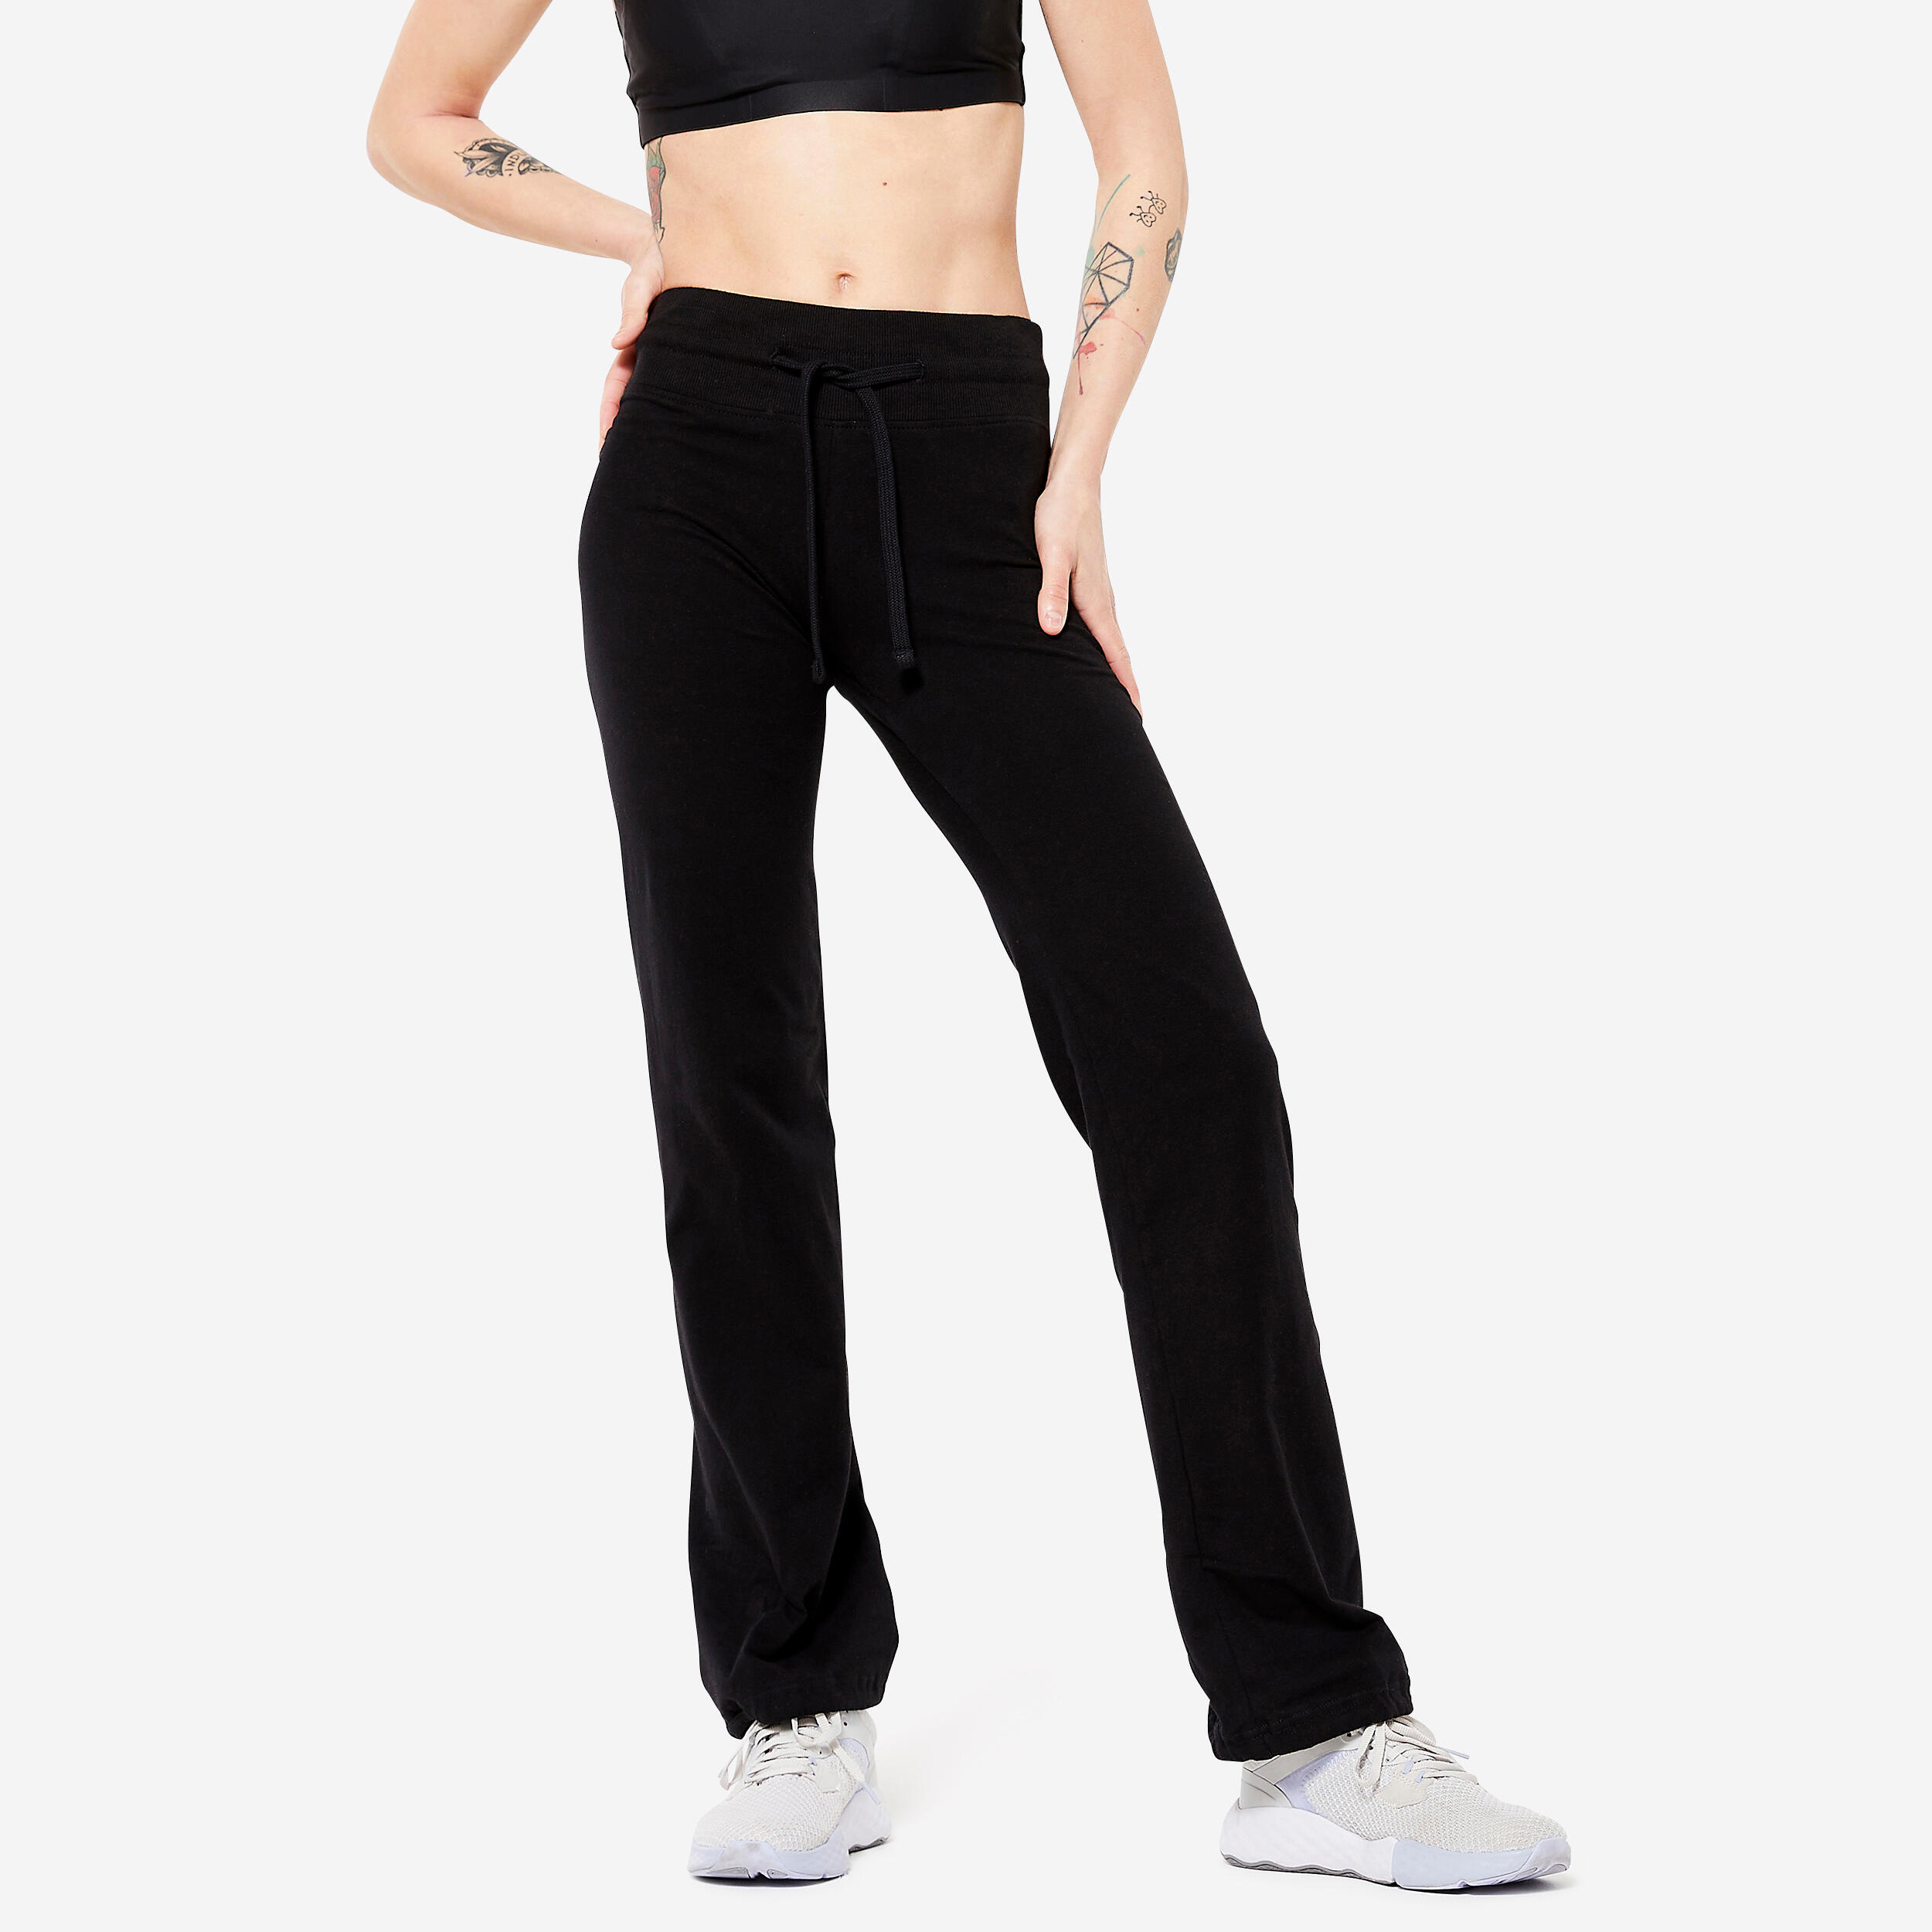 Shop Domyos Womens Gym Leggings up to 10% Off